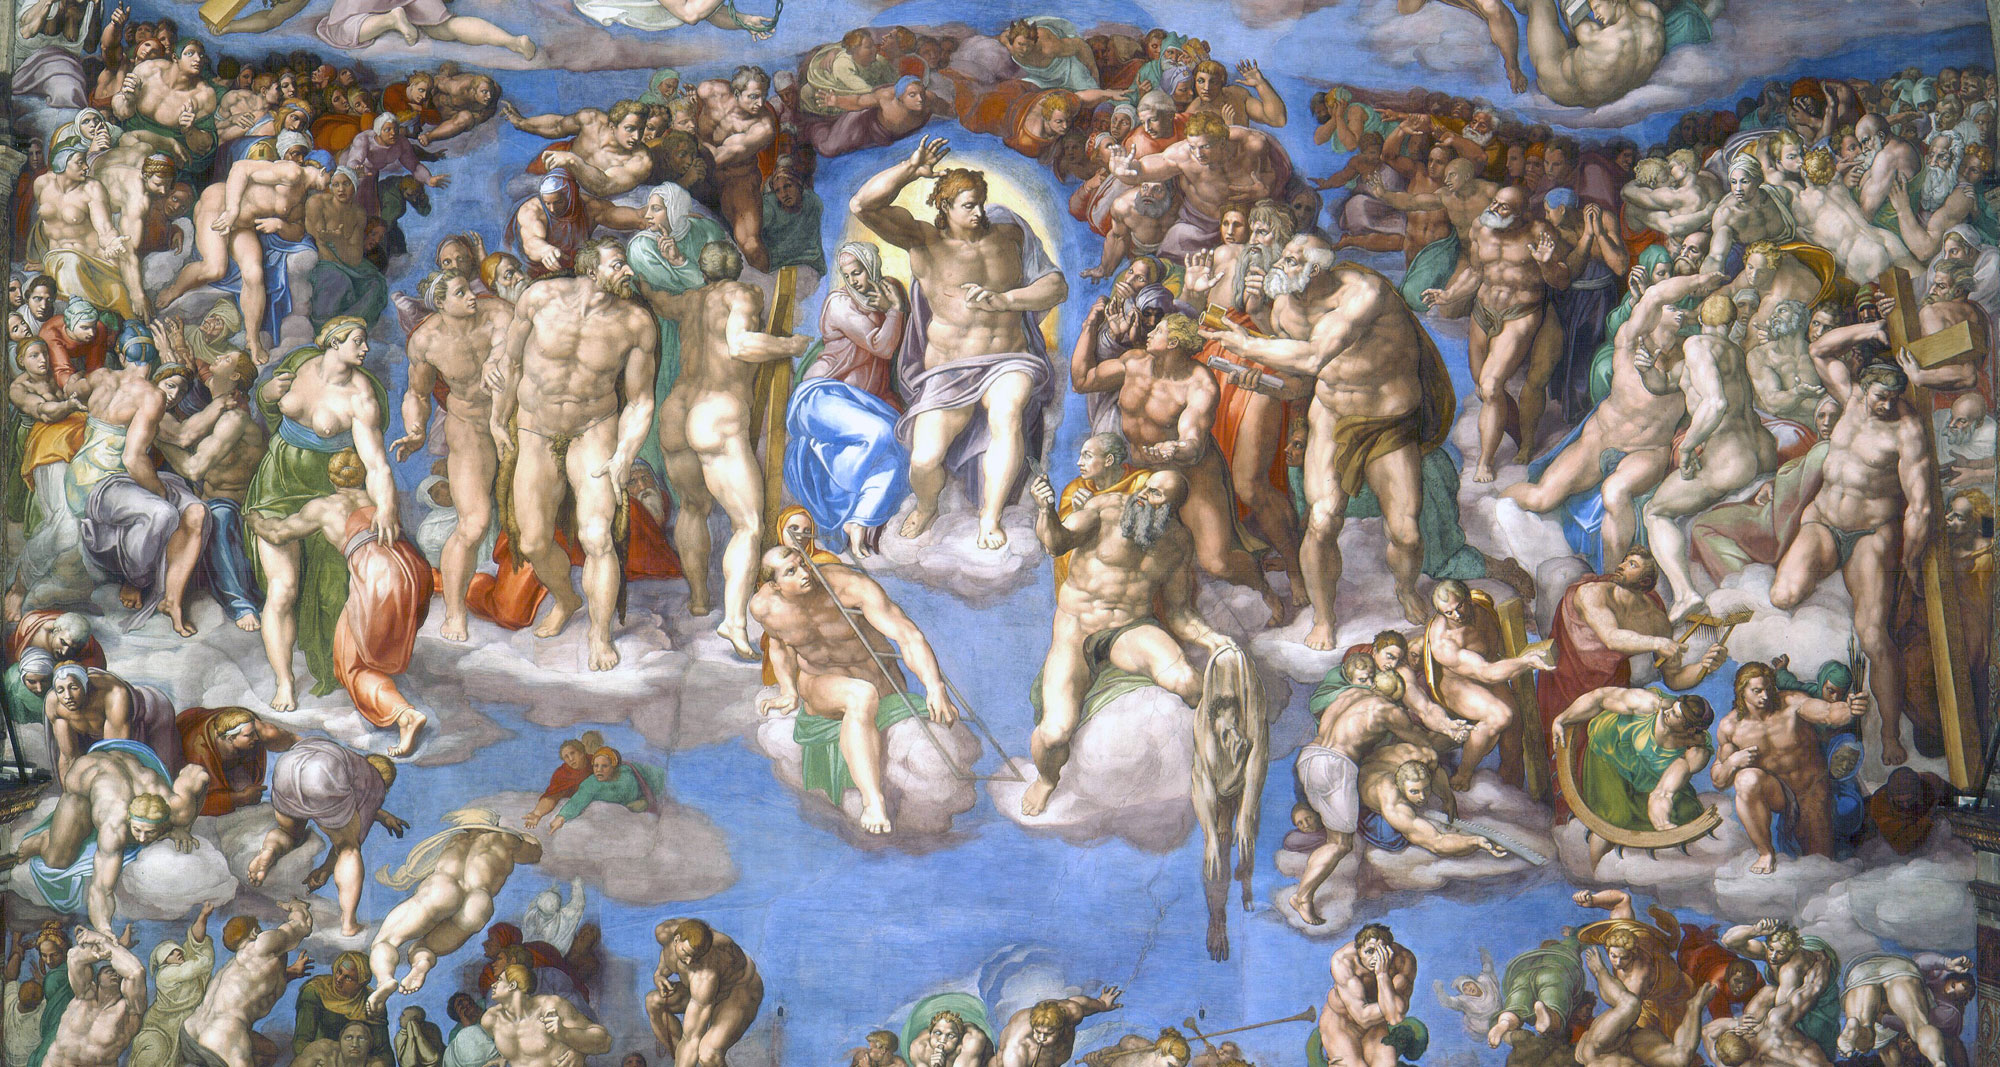 The Last Judgment by Michelangelo